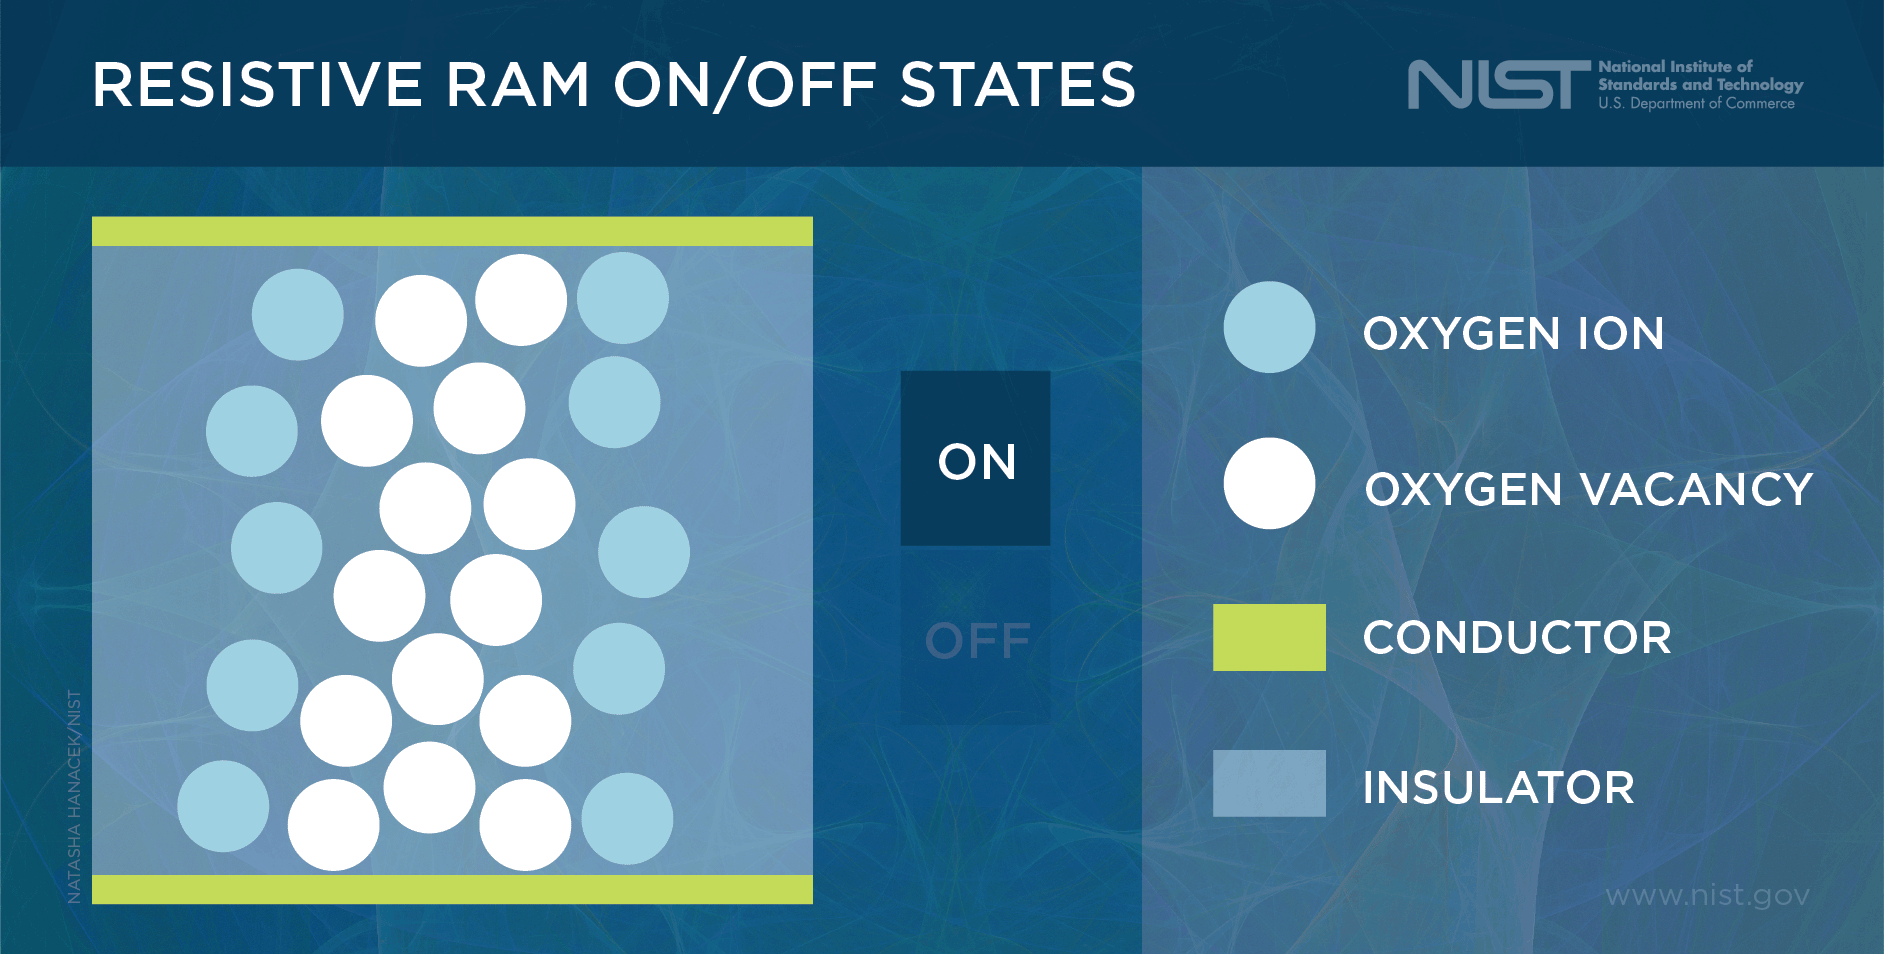 Diagram of resistive ram on/off states with moving on/off switch.